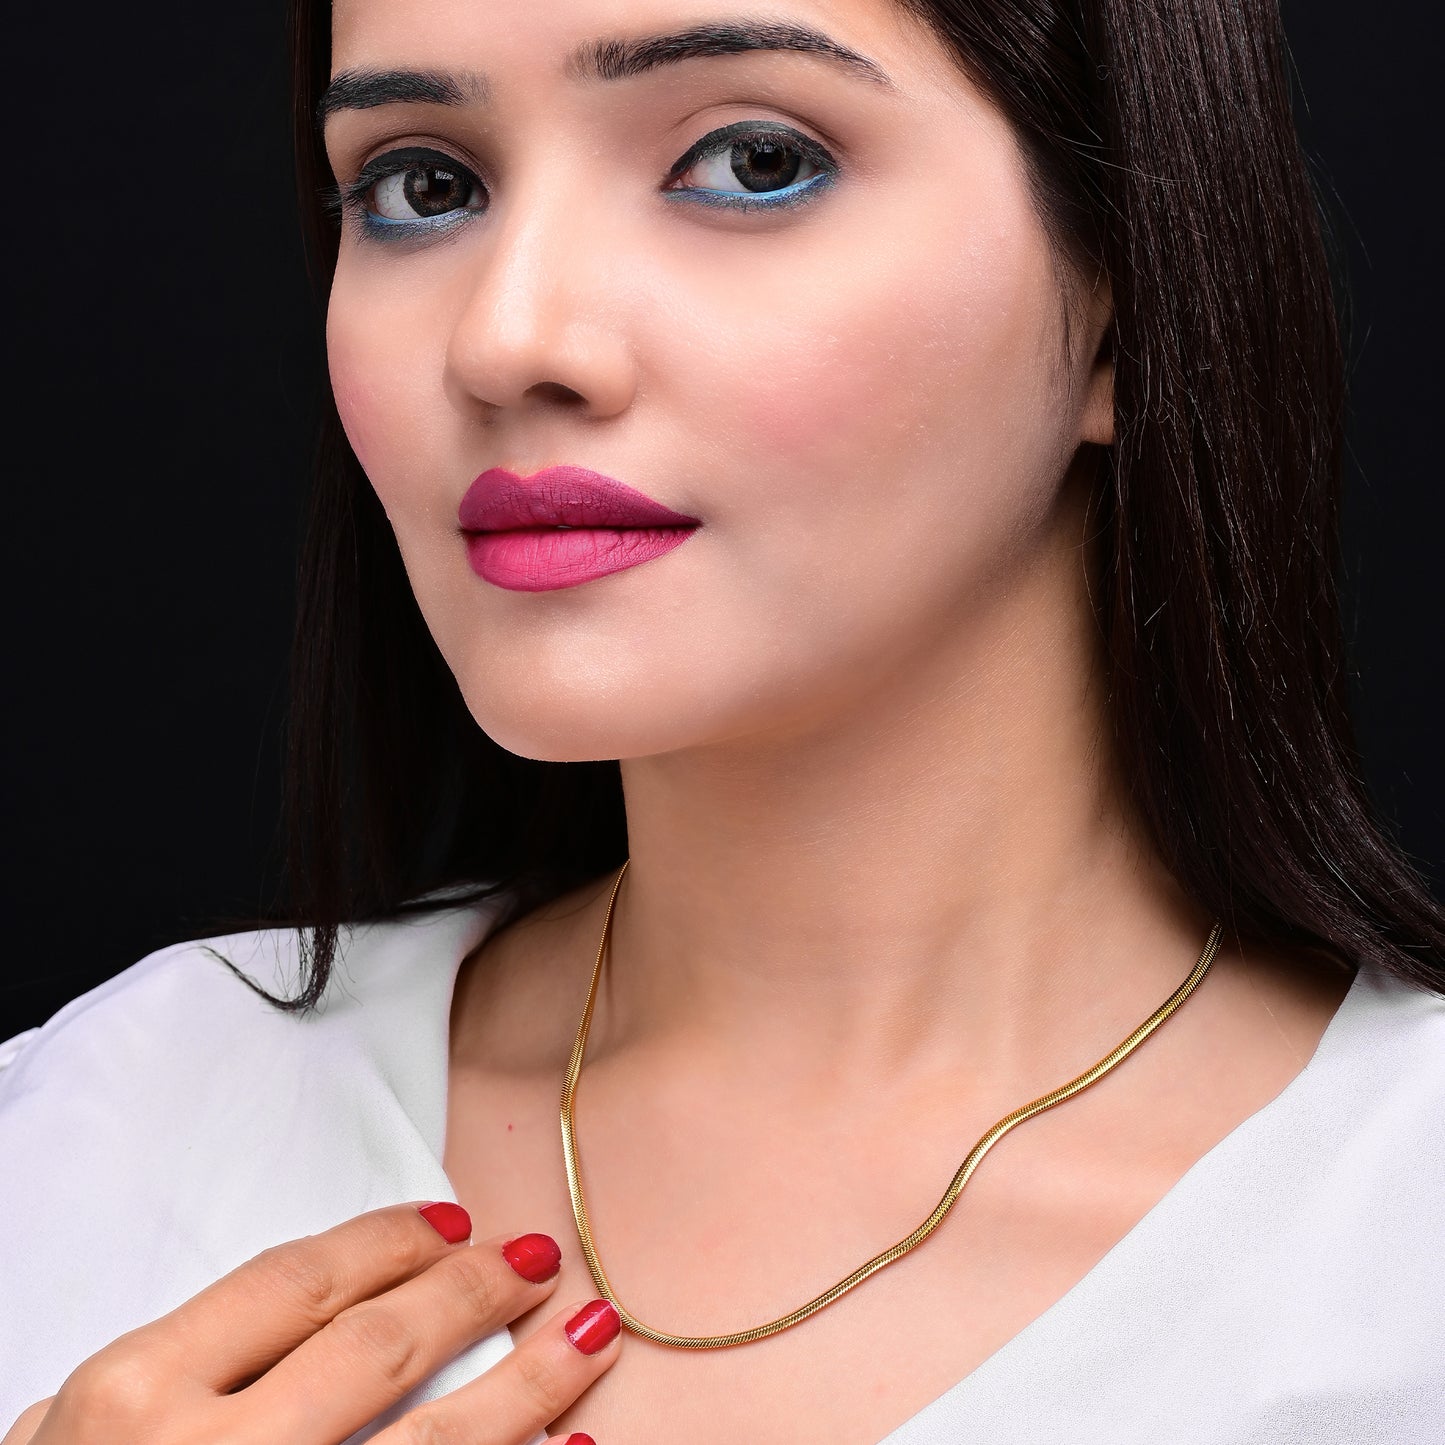 Gold Snake Necklace Chain For Women and Girls